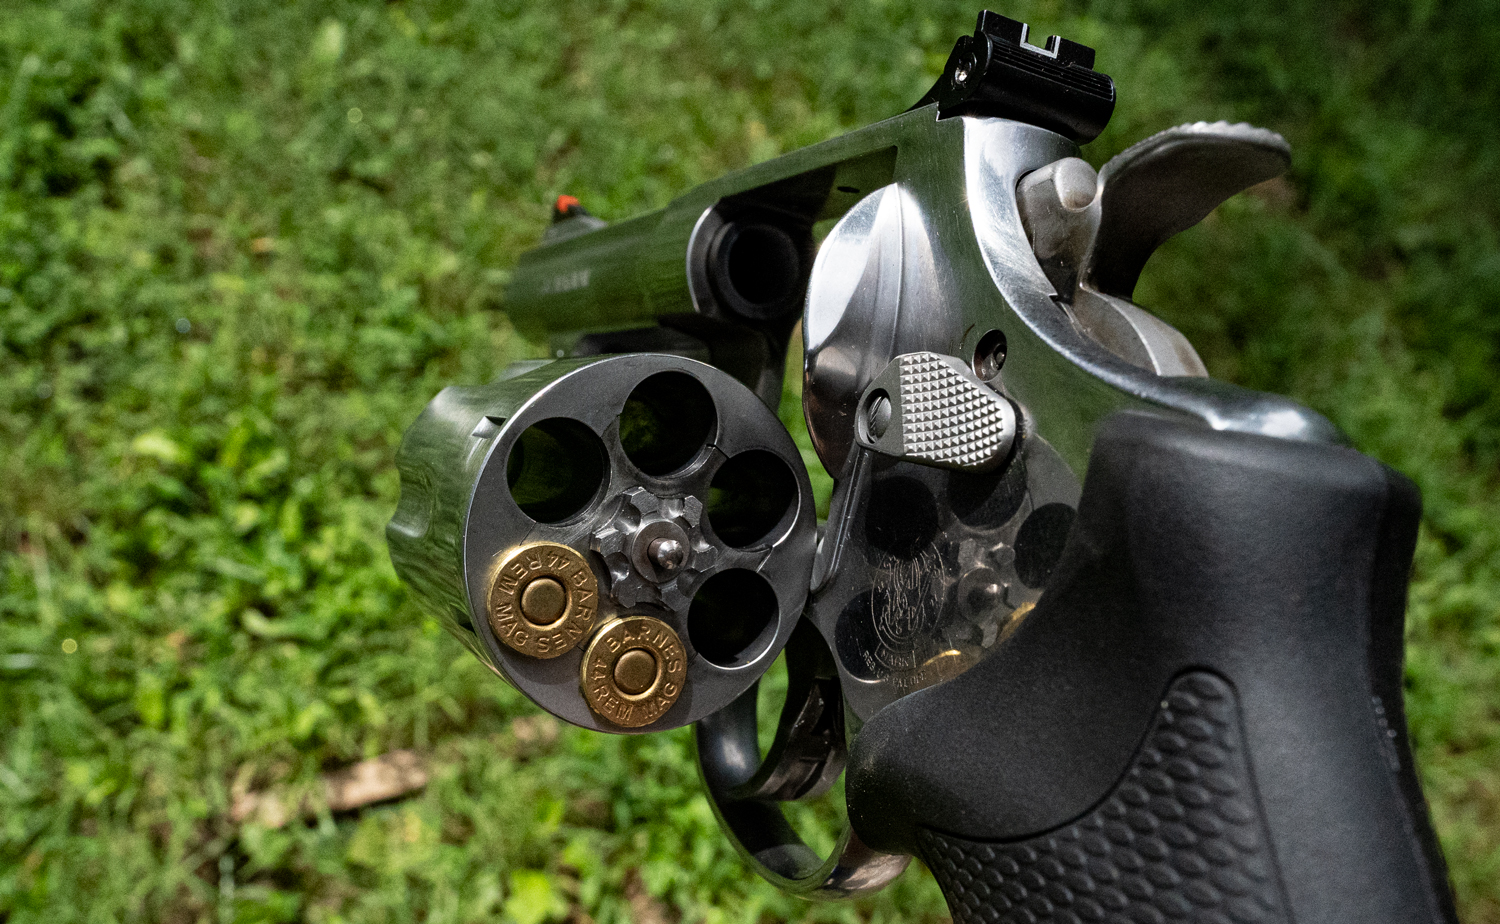 A 44 magnum Smith & Wesson revolver with ammo in the cylinder